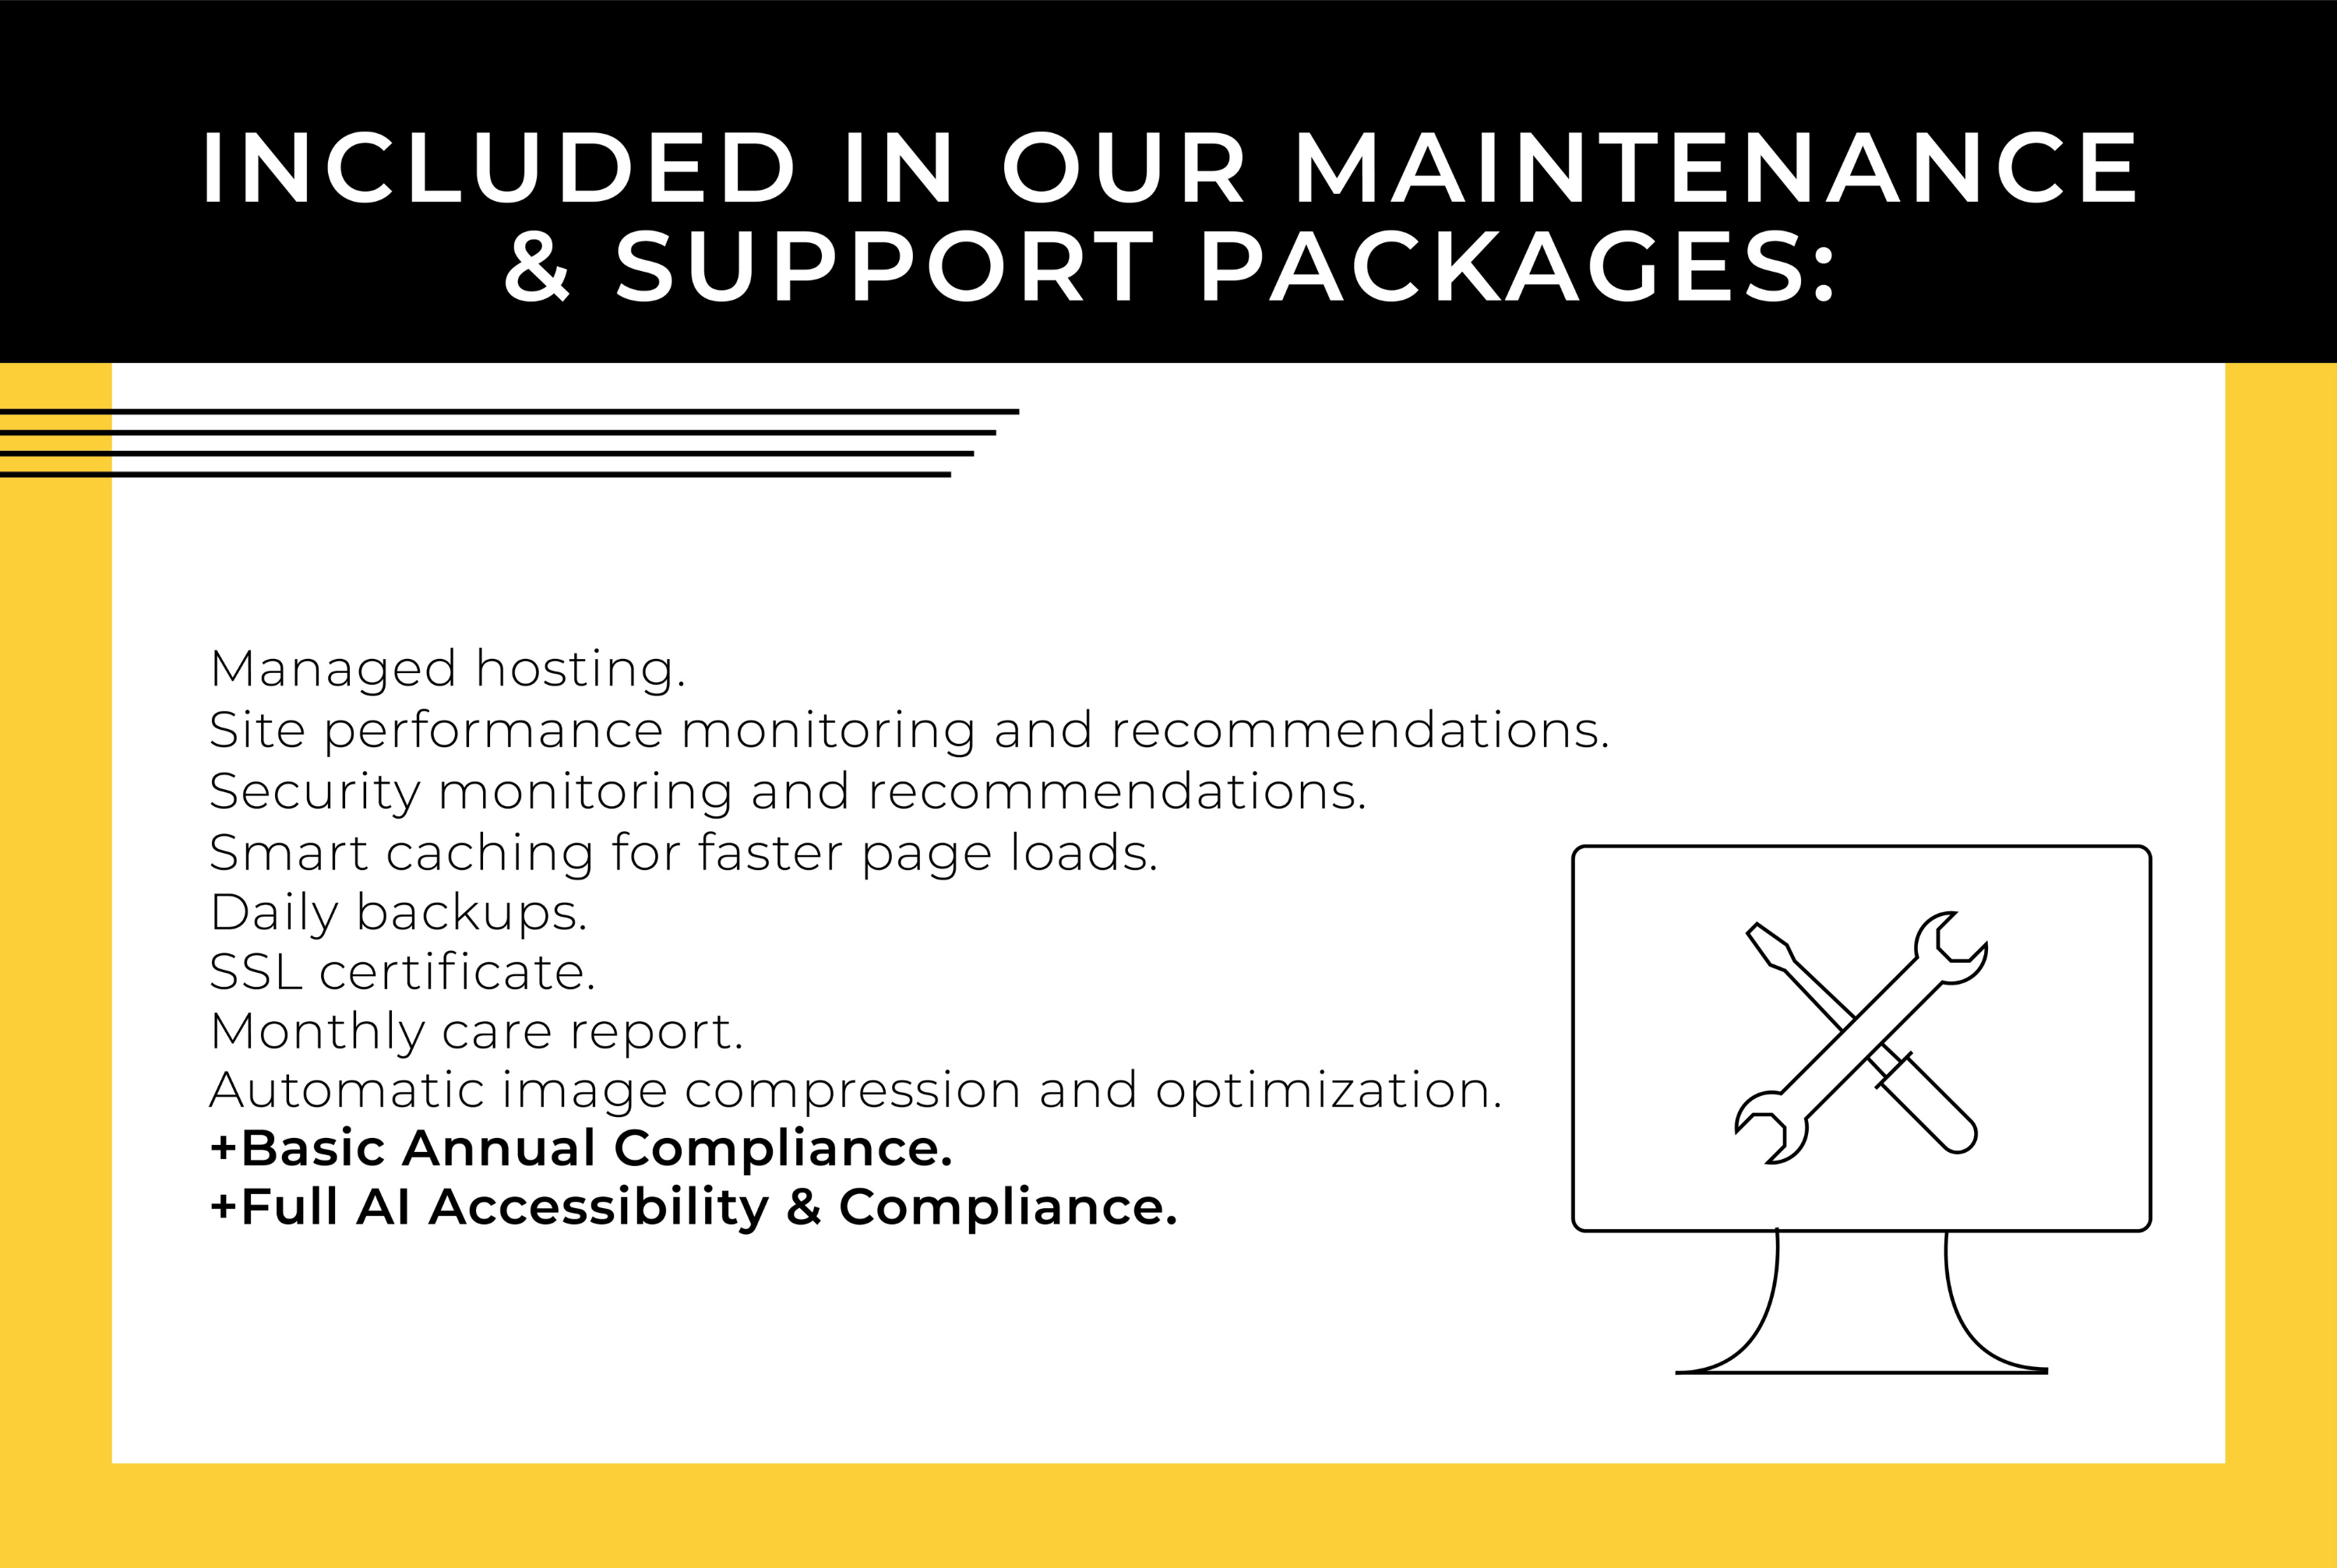 A list of services included in our maintenance and support packages.